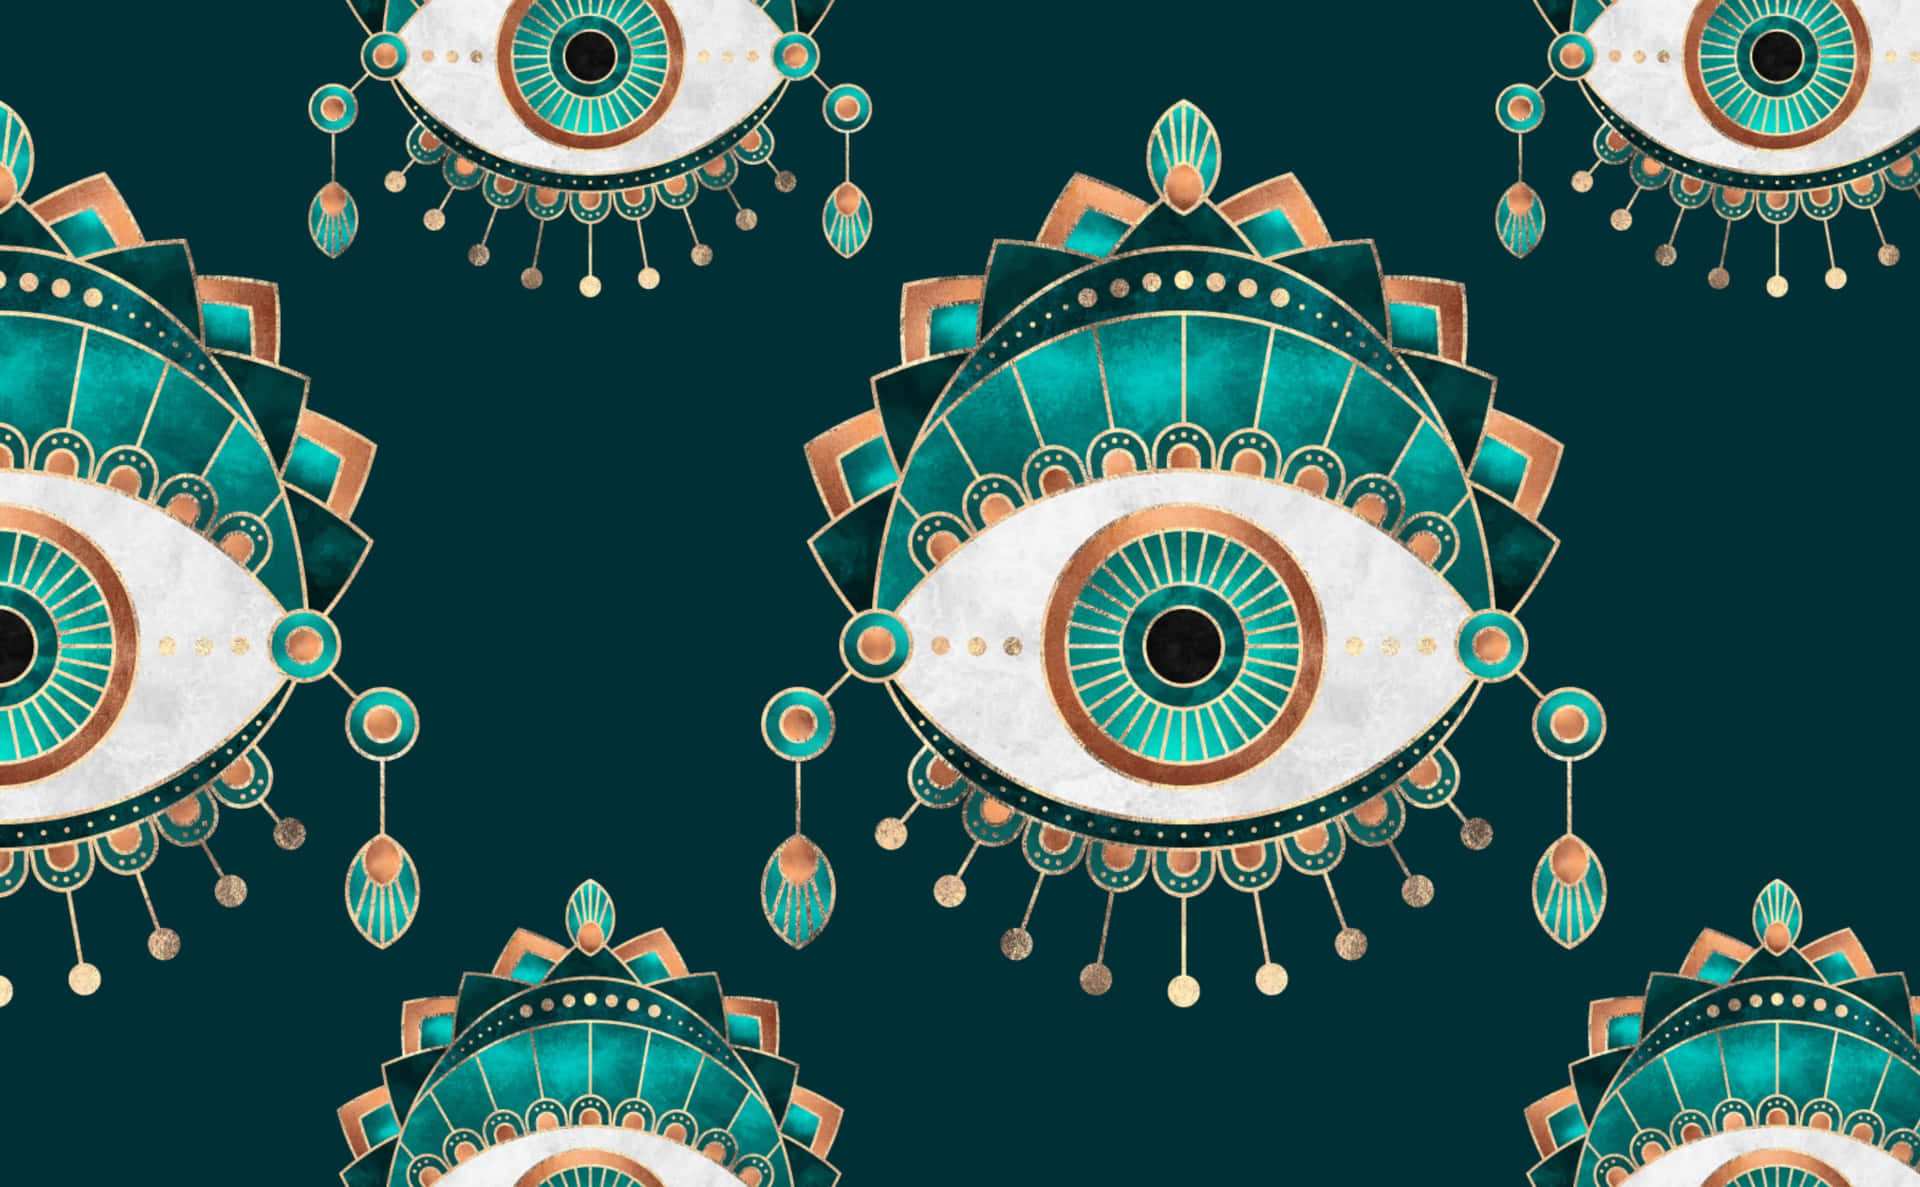 An Eye Pattern With Turquoise And Gold